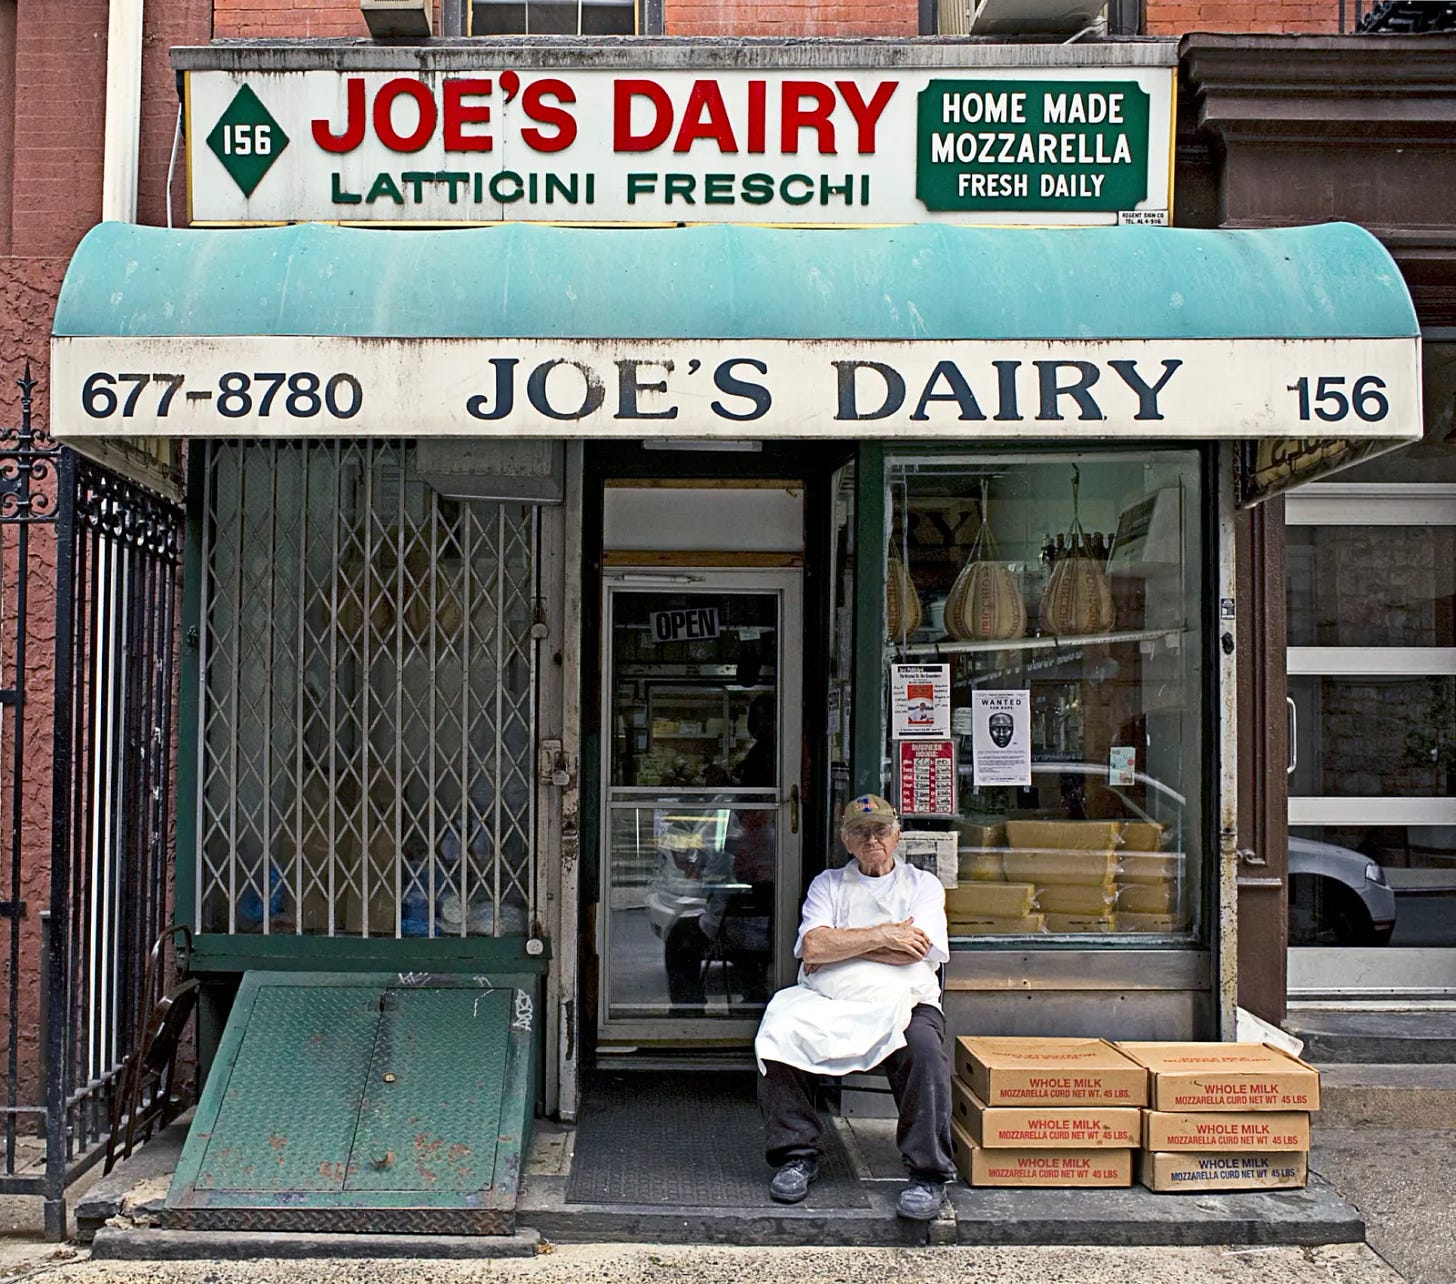 “Joe's Dairy - Soho, 2008” From New York Storefronts by James and Karla Murray